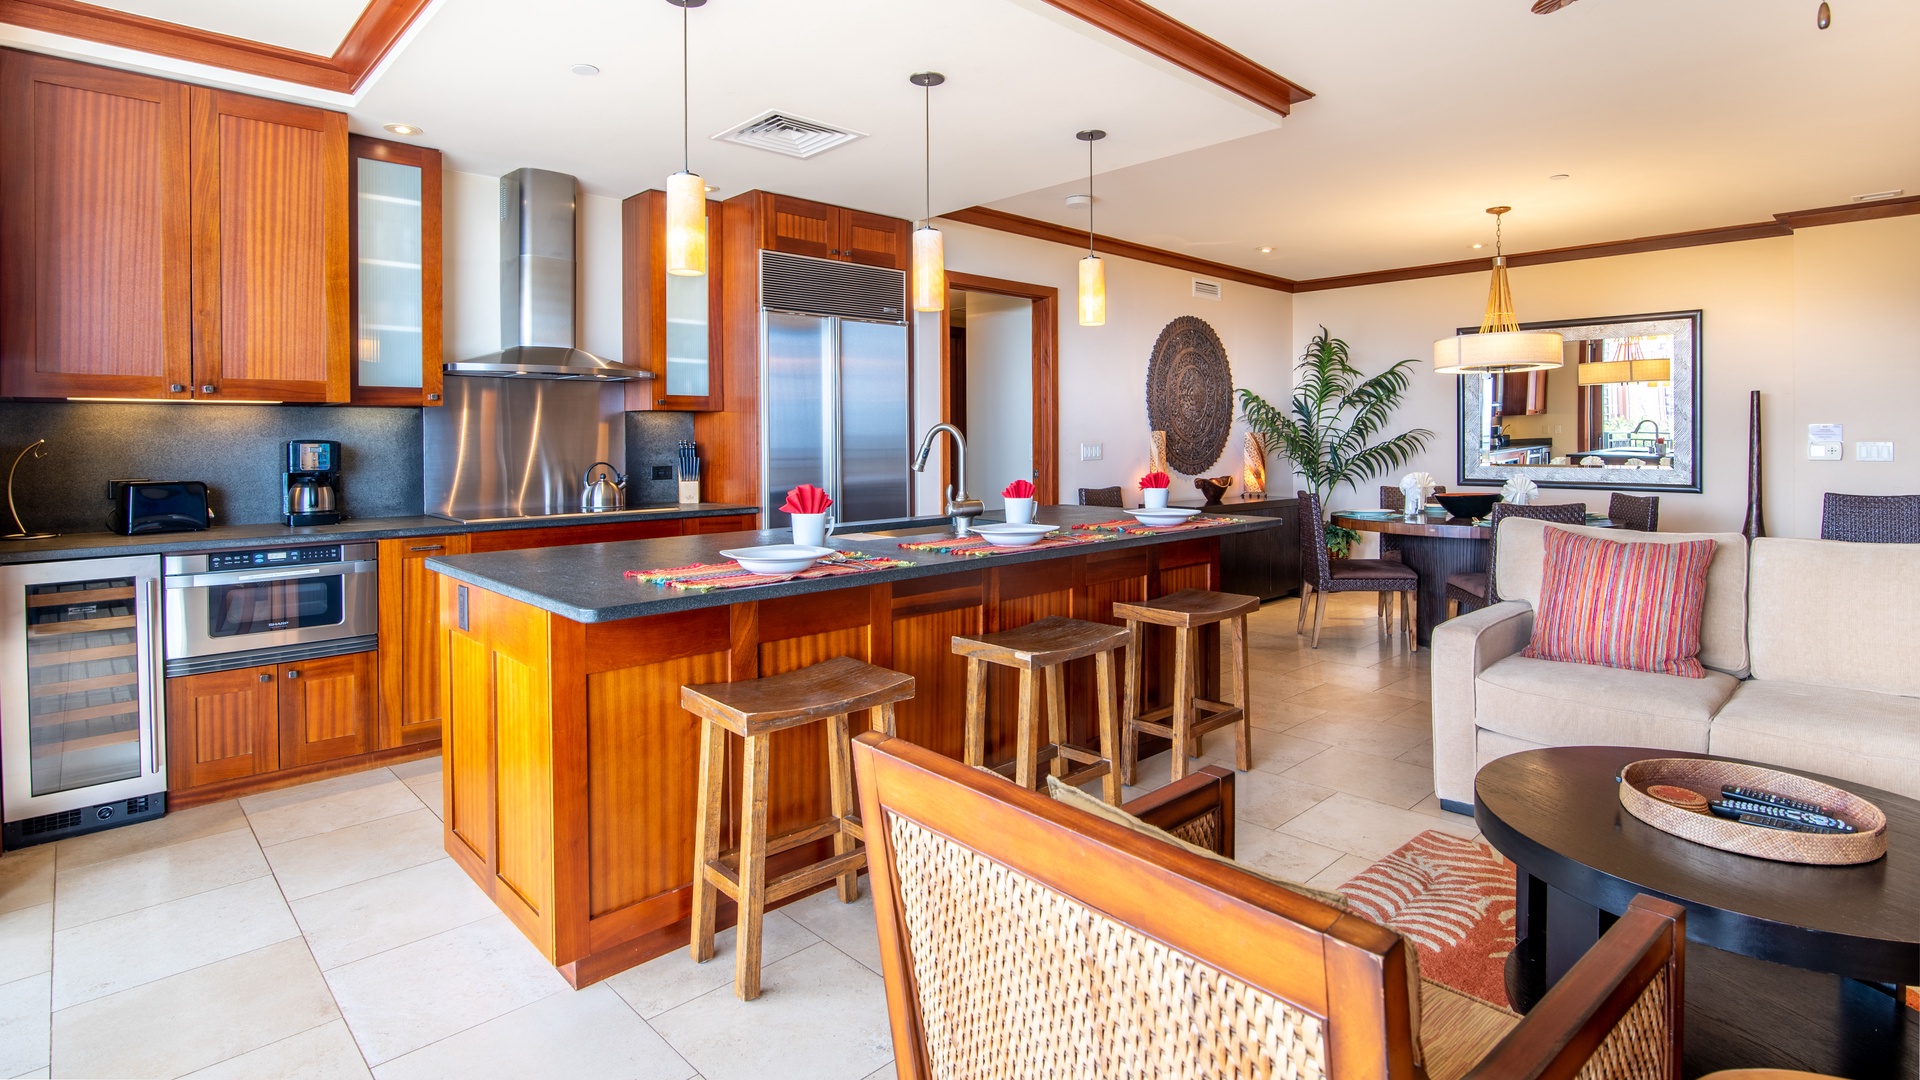 Kapolei Vacation Rentals, Ko Olina Beach Villas B608 - The kitchen is a chef's dream with stainless steel appliances and bar seating.